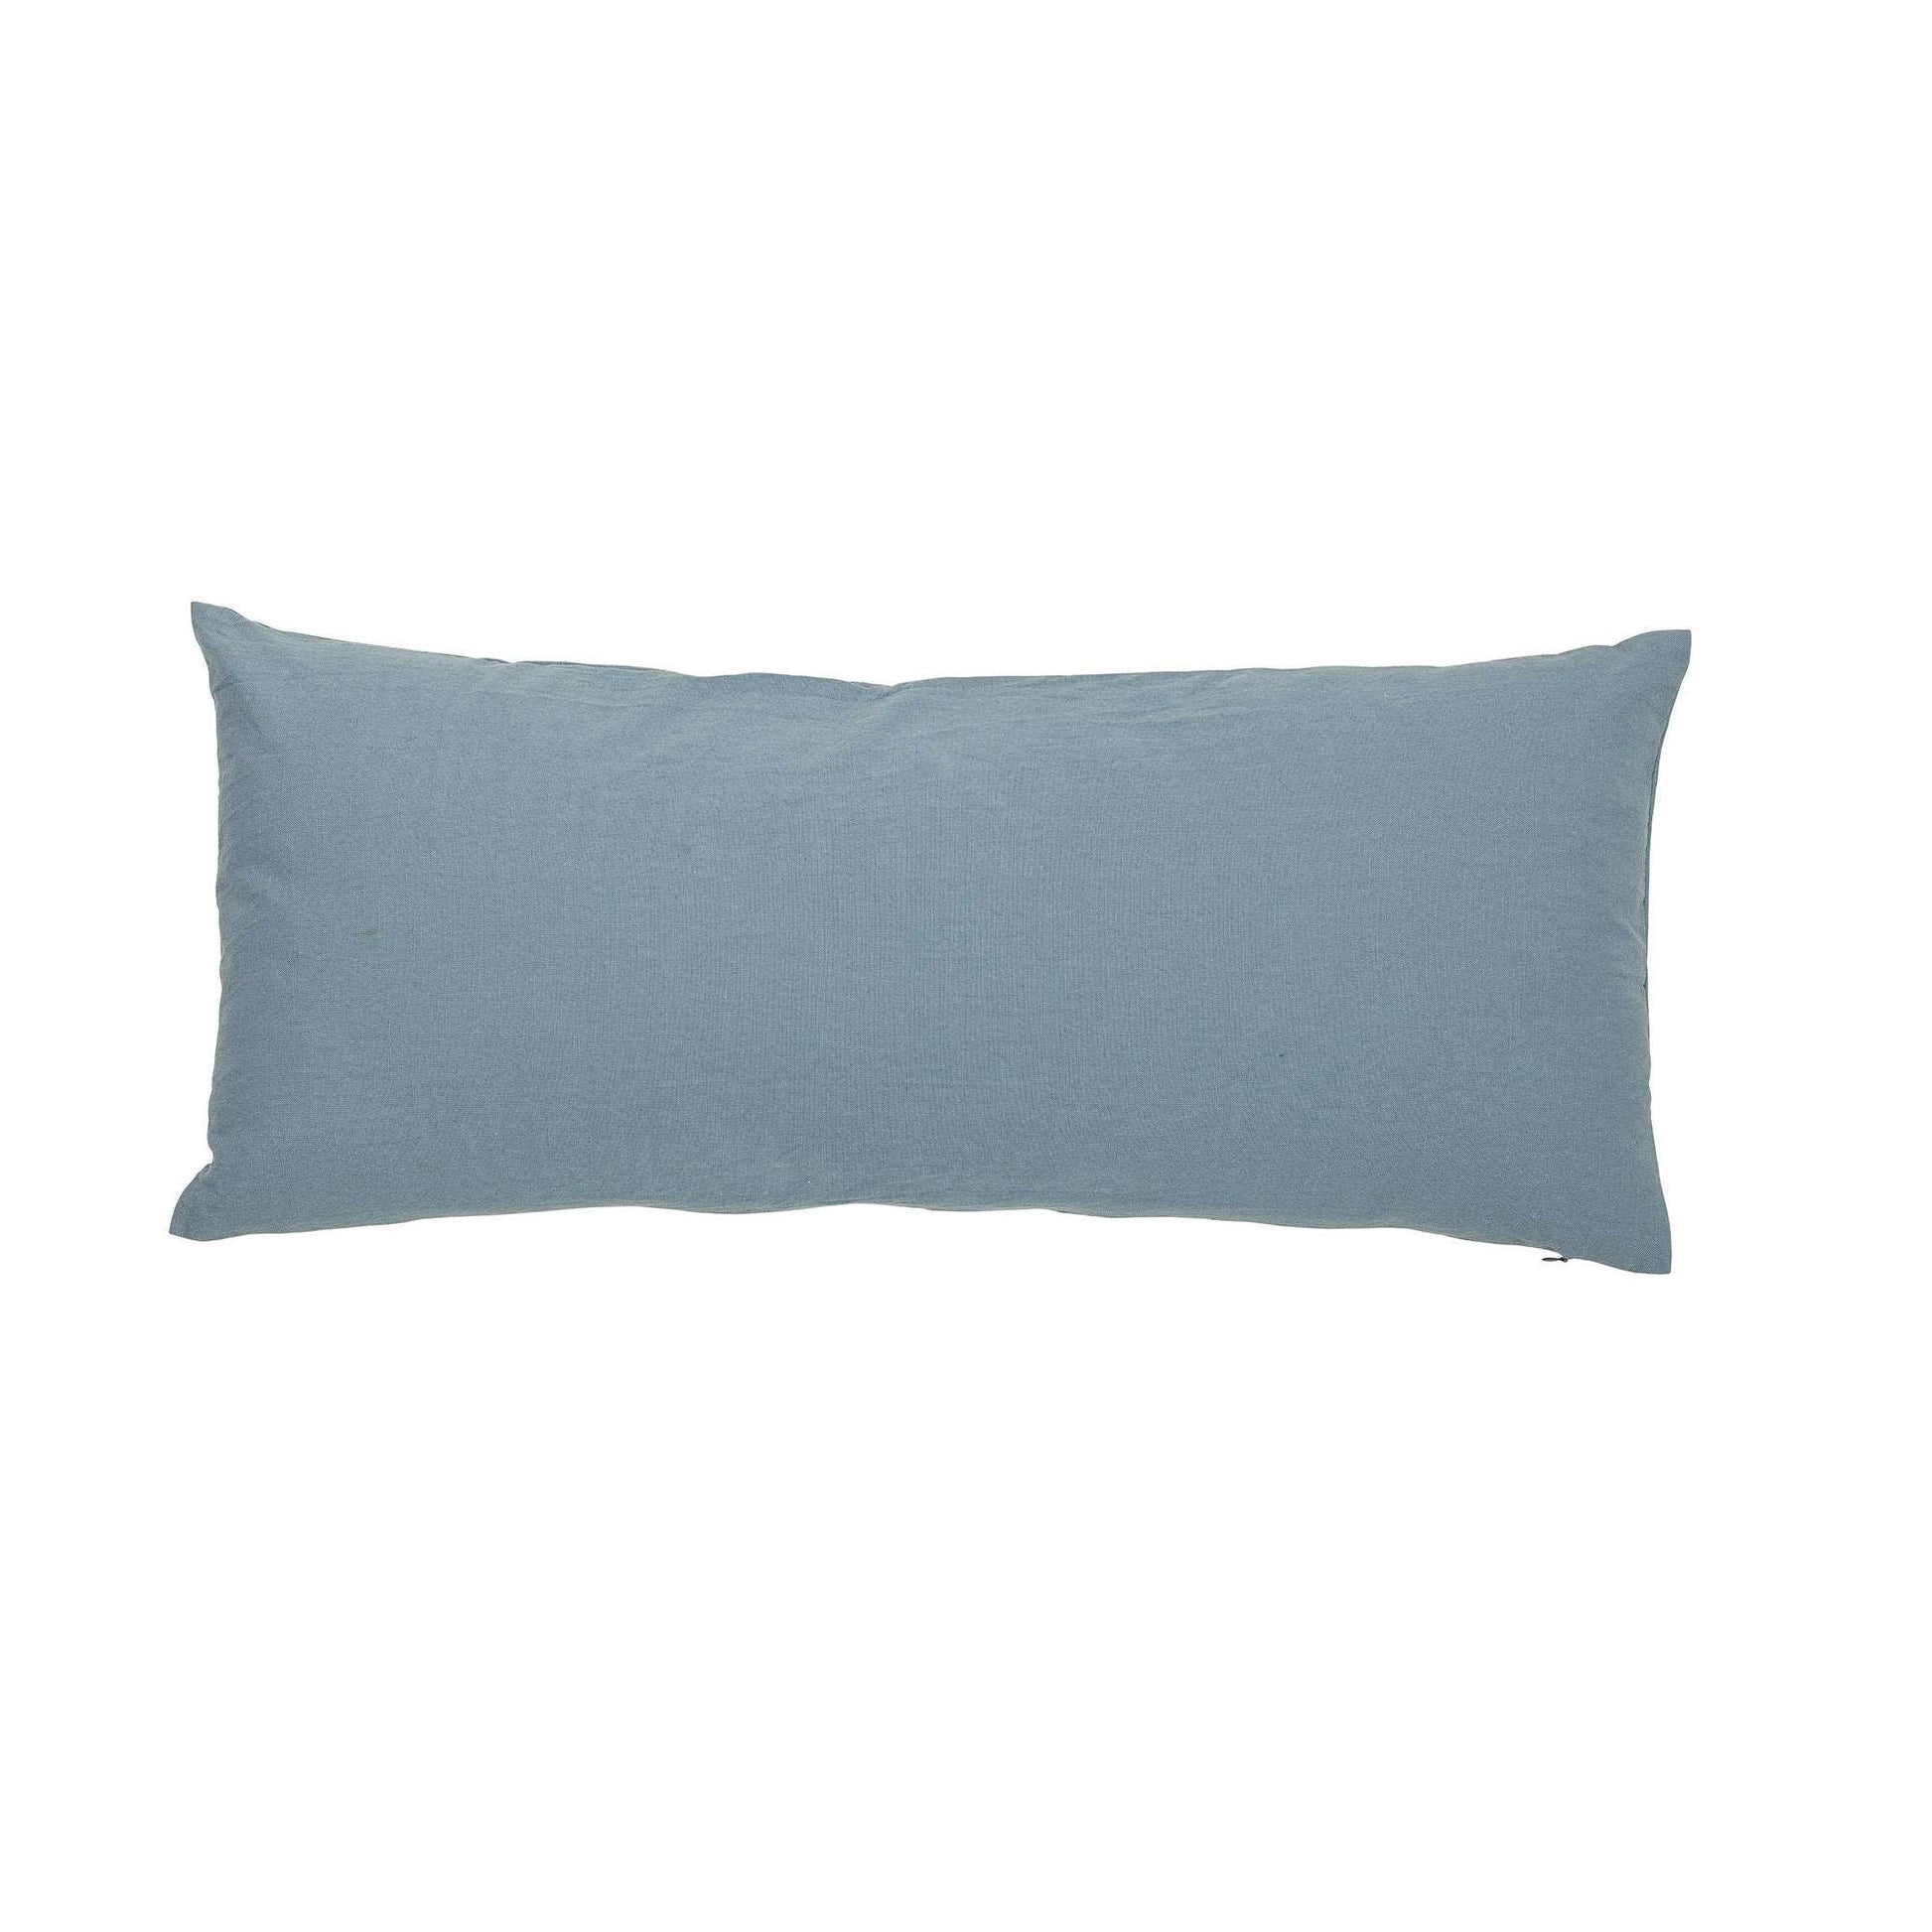 This beautiful cushion will bring happiness into any room. Texture and colour all in one, it is perfect for both bedroom & living room.      Dimensions: L70/W30cm  Outer material: 100% cotton woven  Inner filling: 100% Polyester  Machine wash 30 degrees  Hang to dry